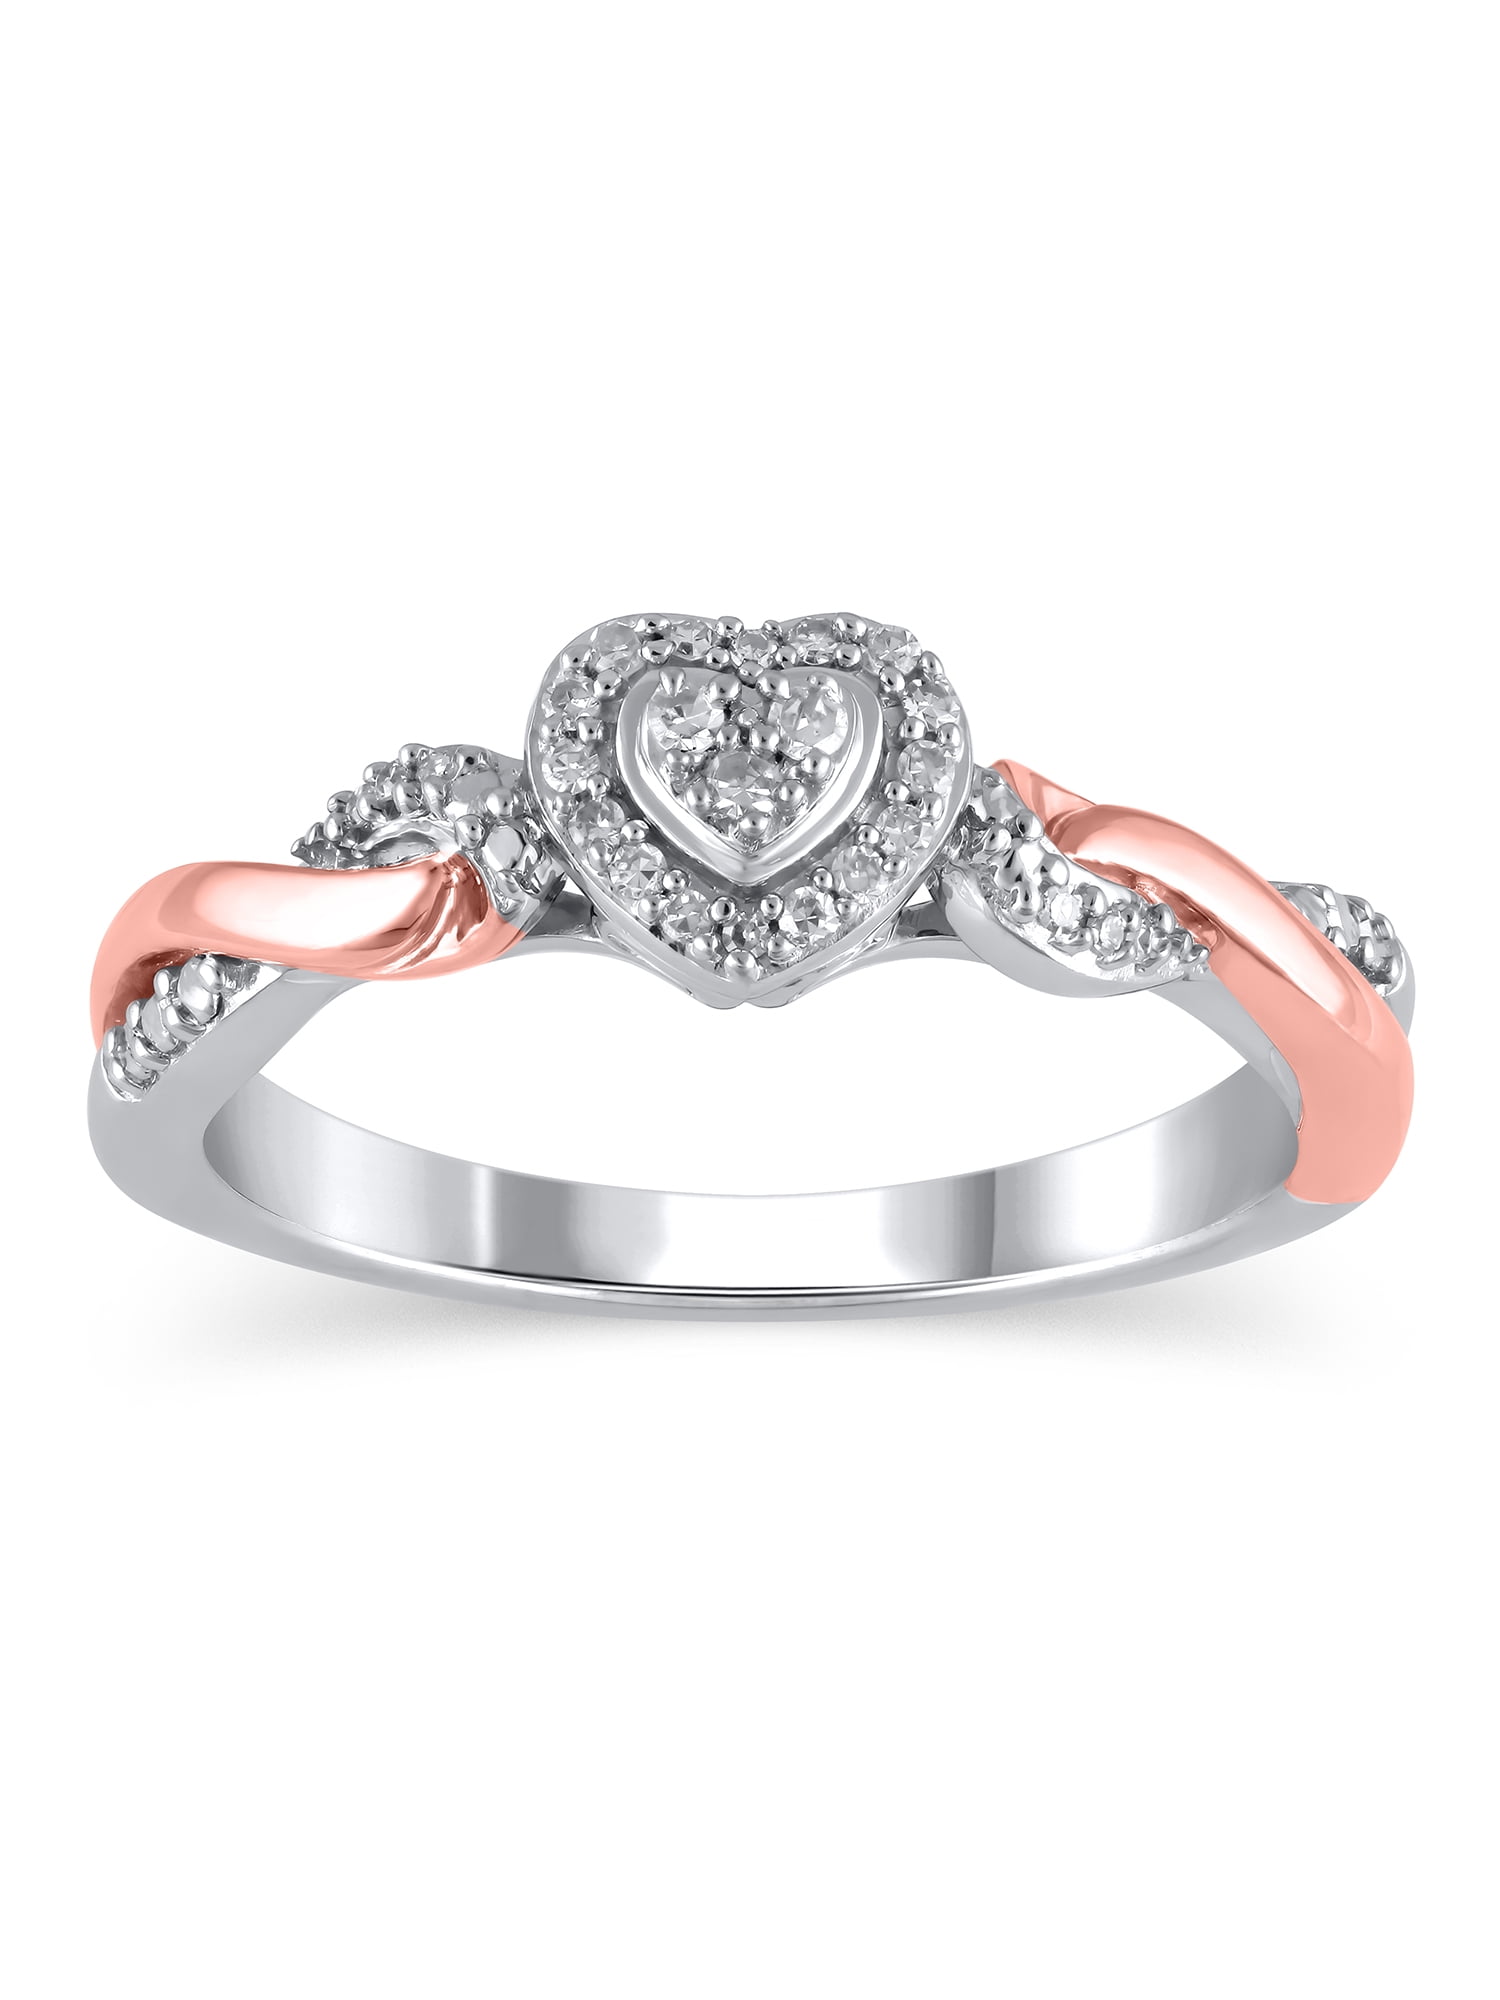 Verborgen Surrey Vaag 1/10 Carat T.W. (I3 clarity, I-J color) Hold My Hand Diamond Heart Promise  Ring in Sterling Silver with 14K Rose Gold Plating, Size 7 - Walmart.com